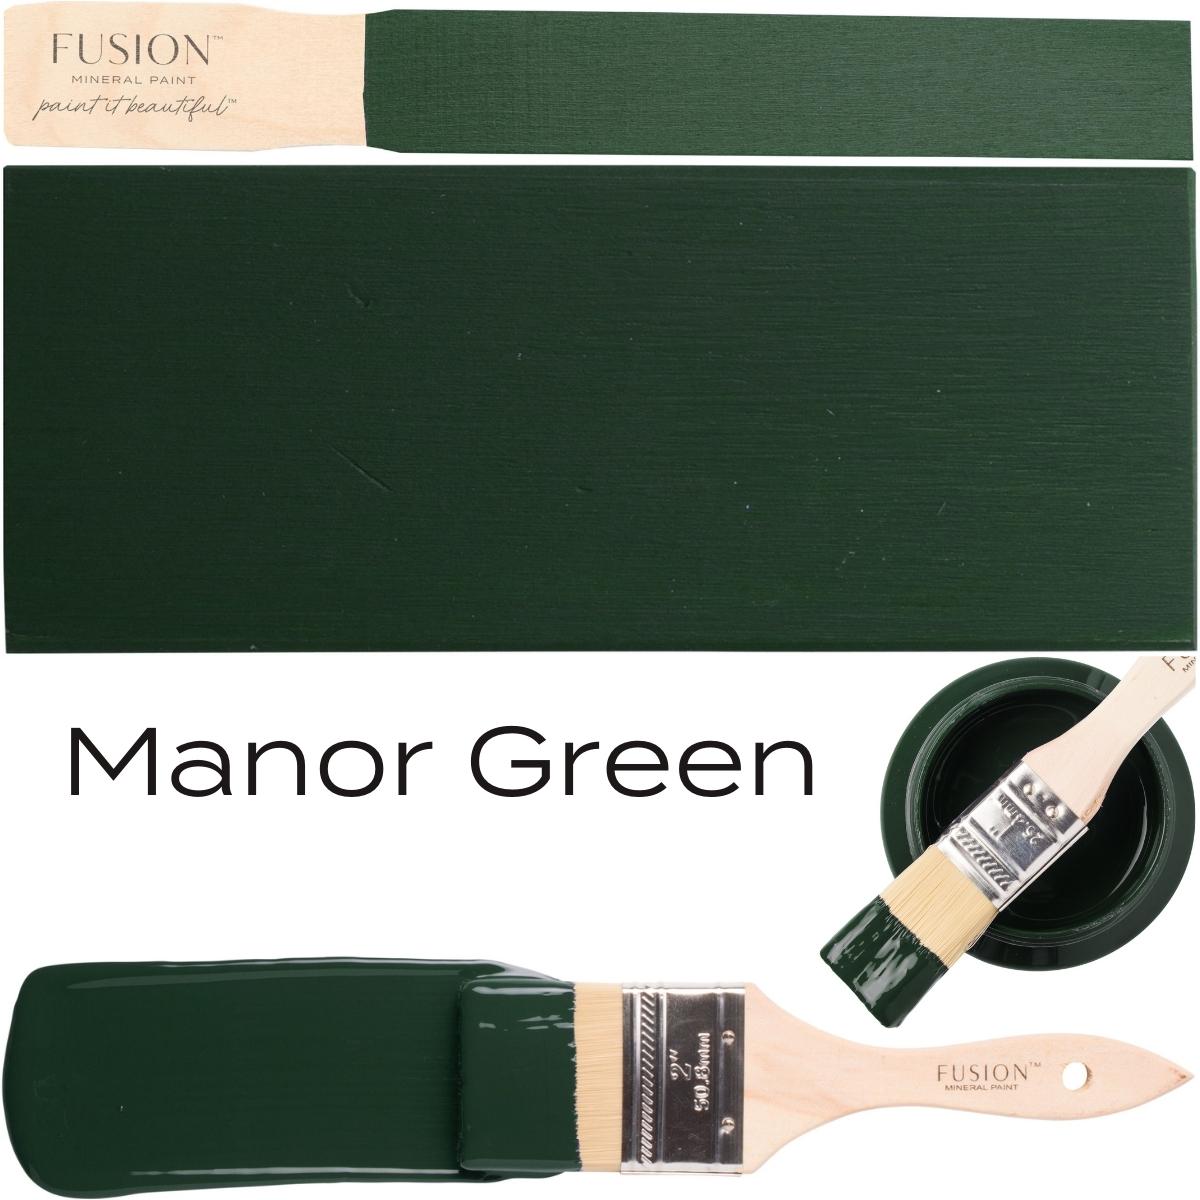 Manor Green Fusion Mineral Paint @ The Painted Heirloom